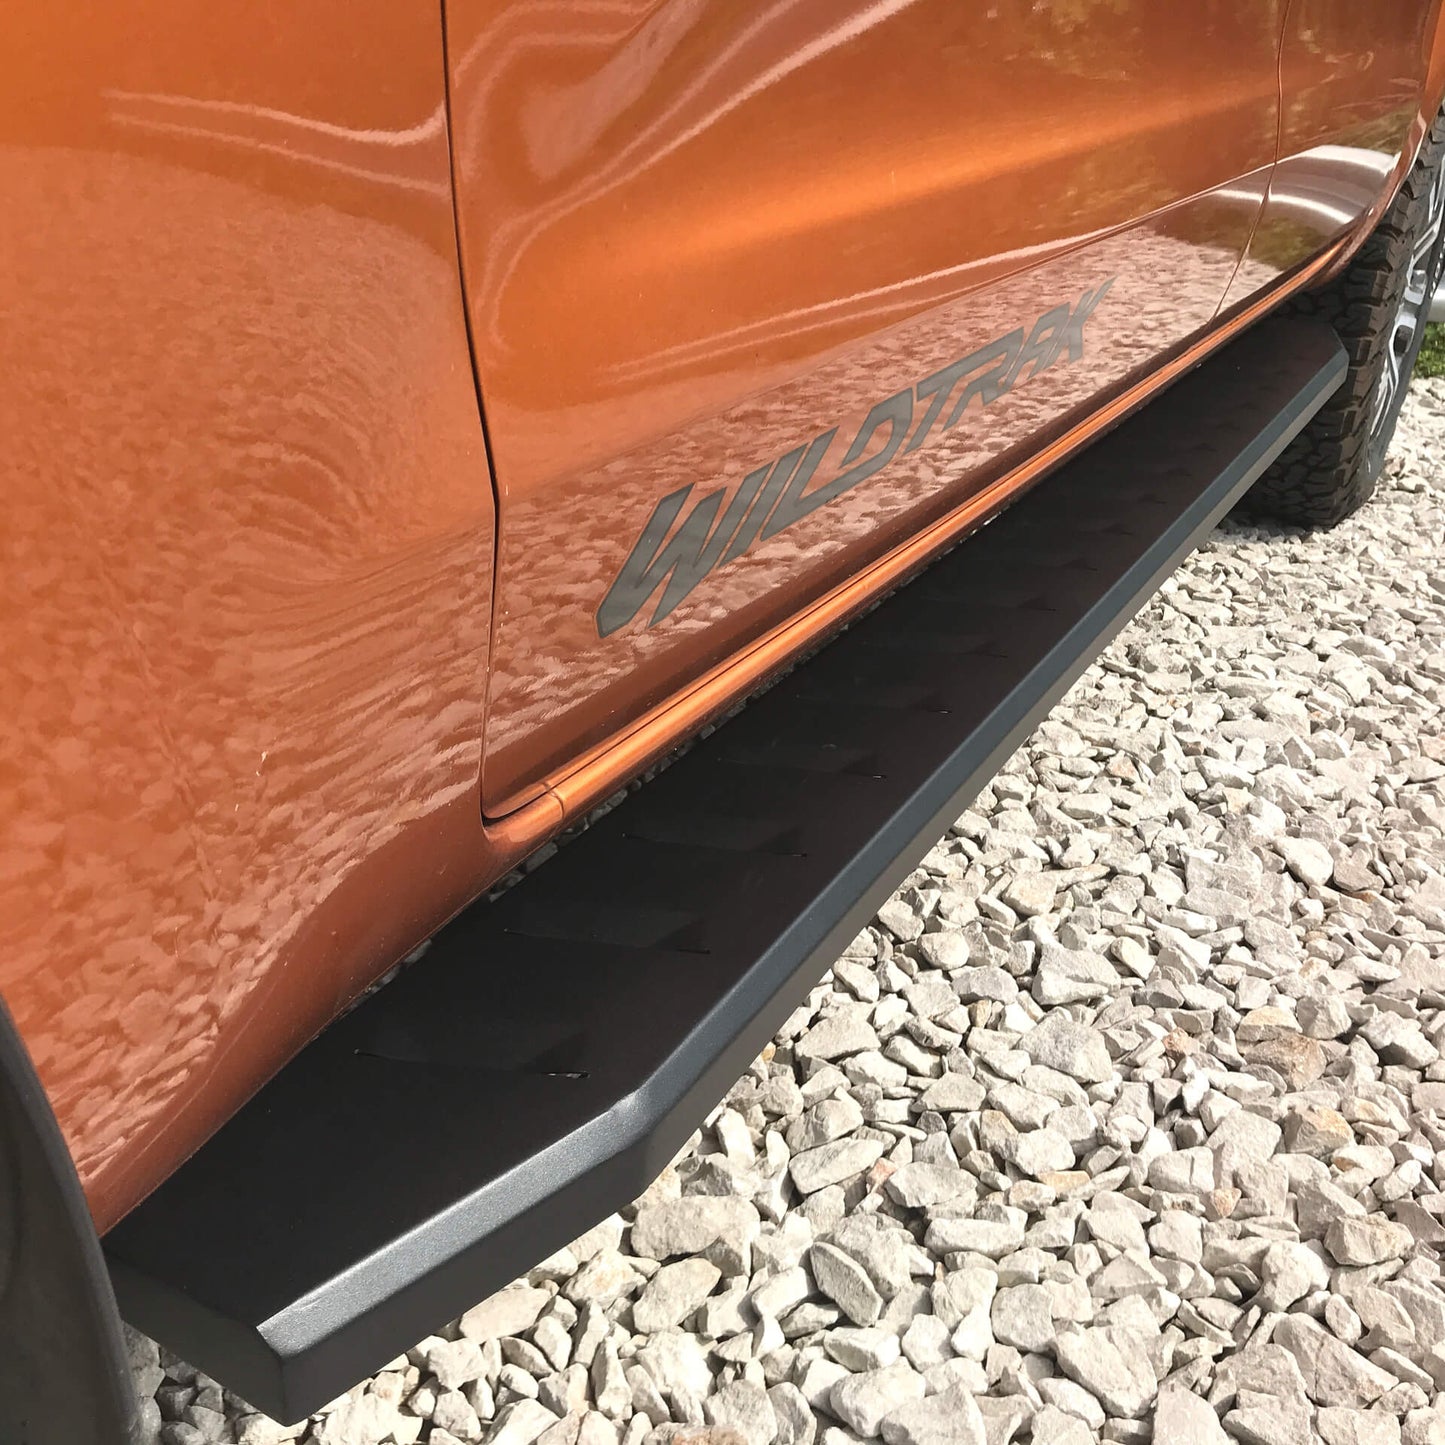 Shark Side Steps Running Boards for Nissan Navara NP300 Double Cab 2015+ -  - sold by Direct4x4